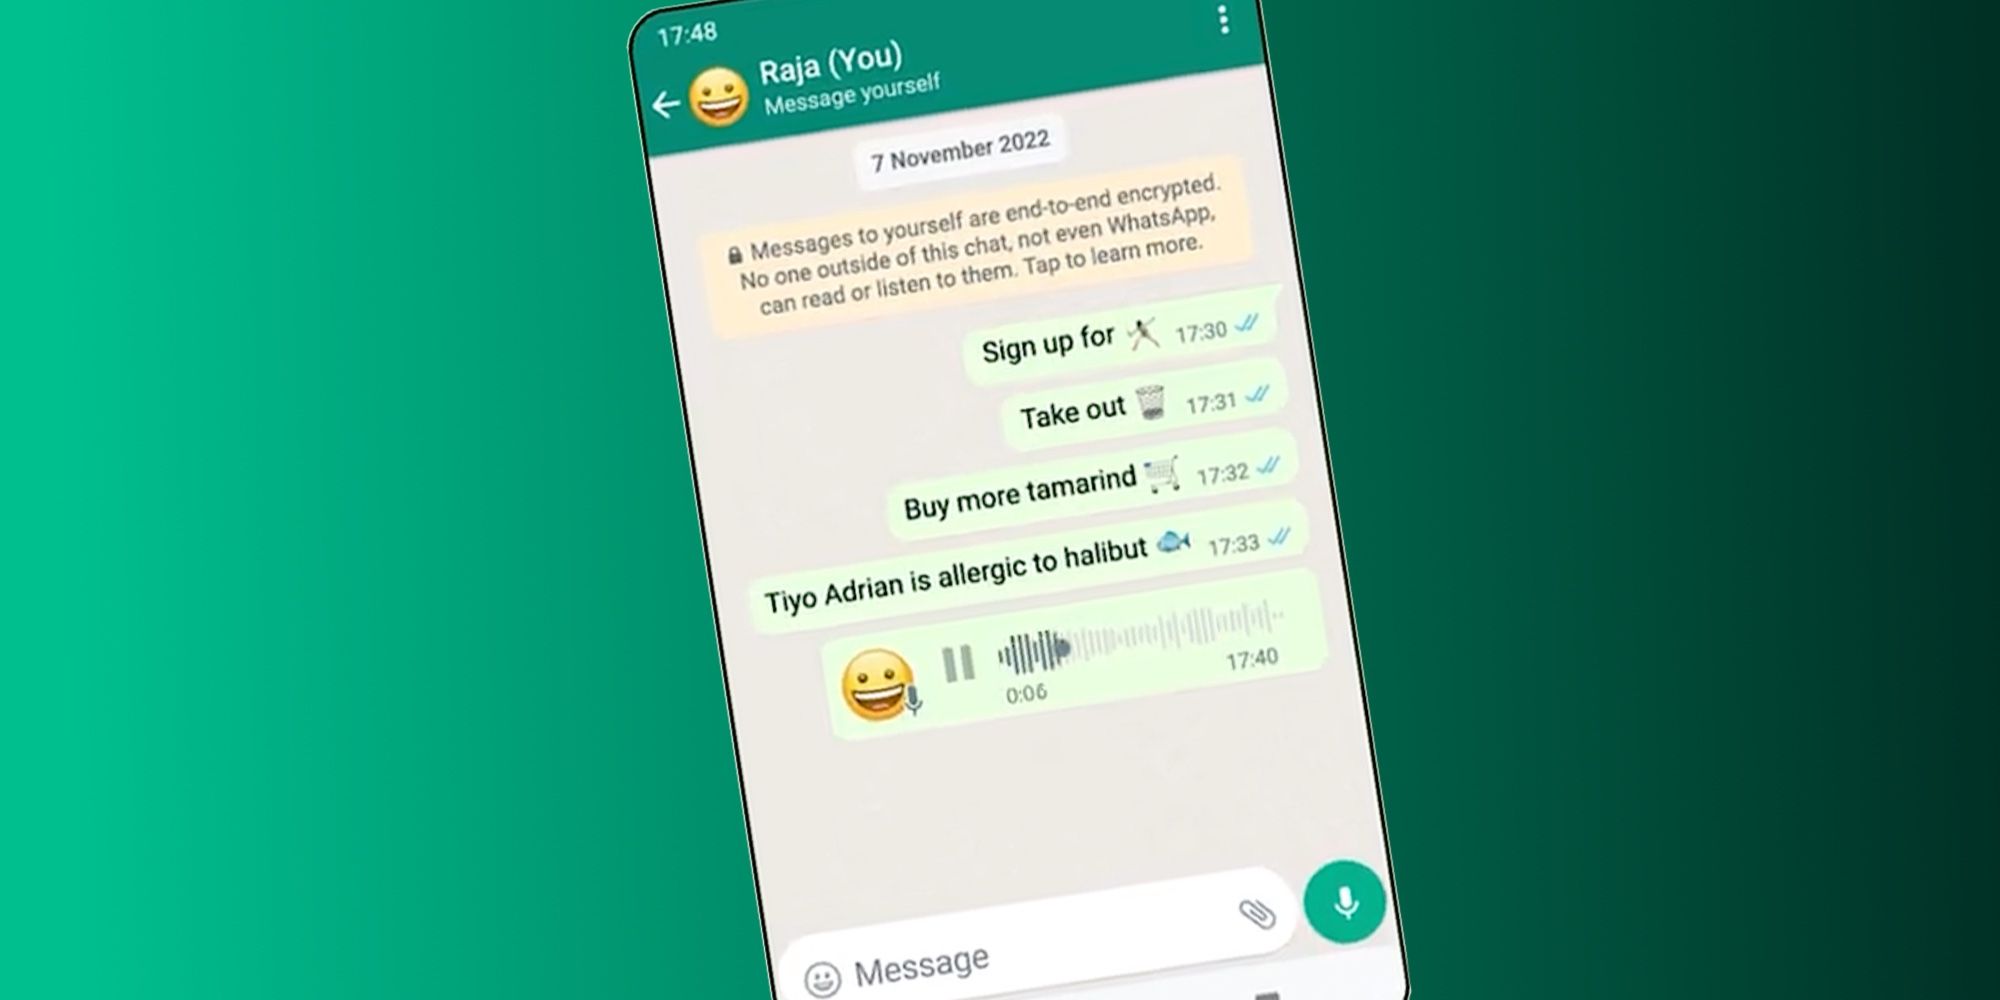 How To Message Yourself On WhatsApp (And Why You Might Want To)